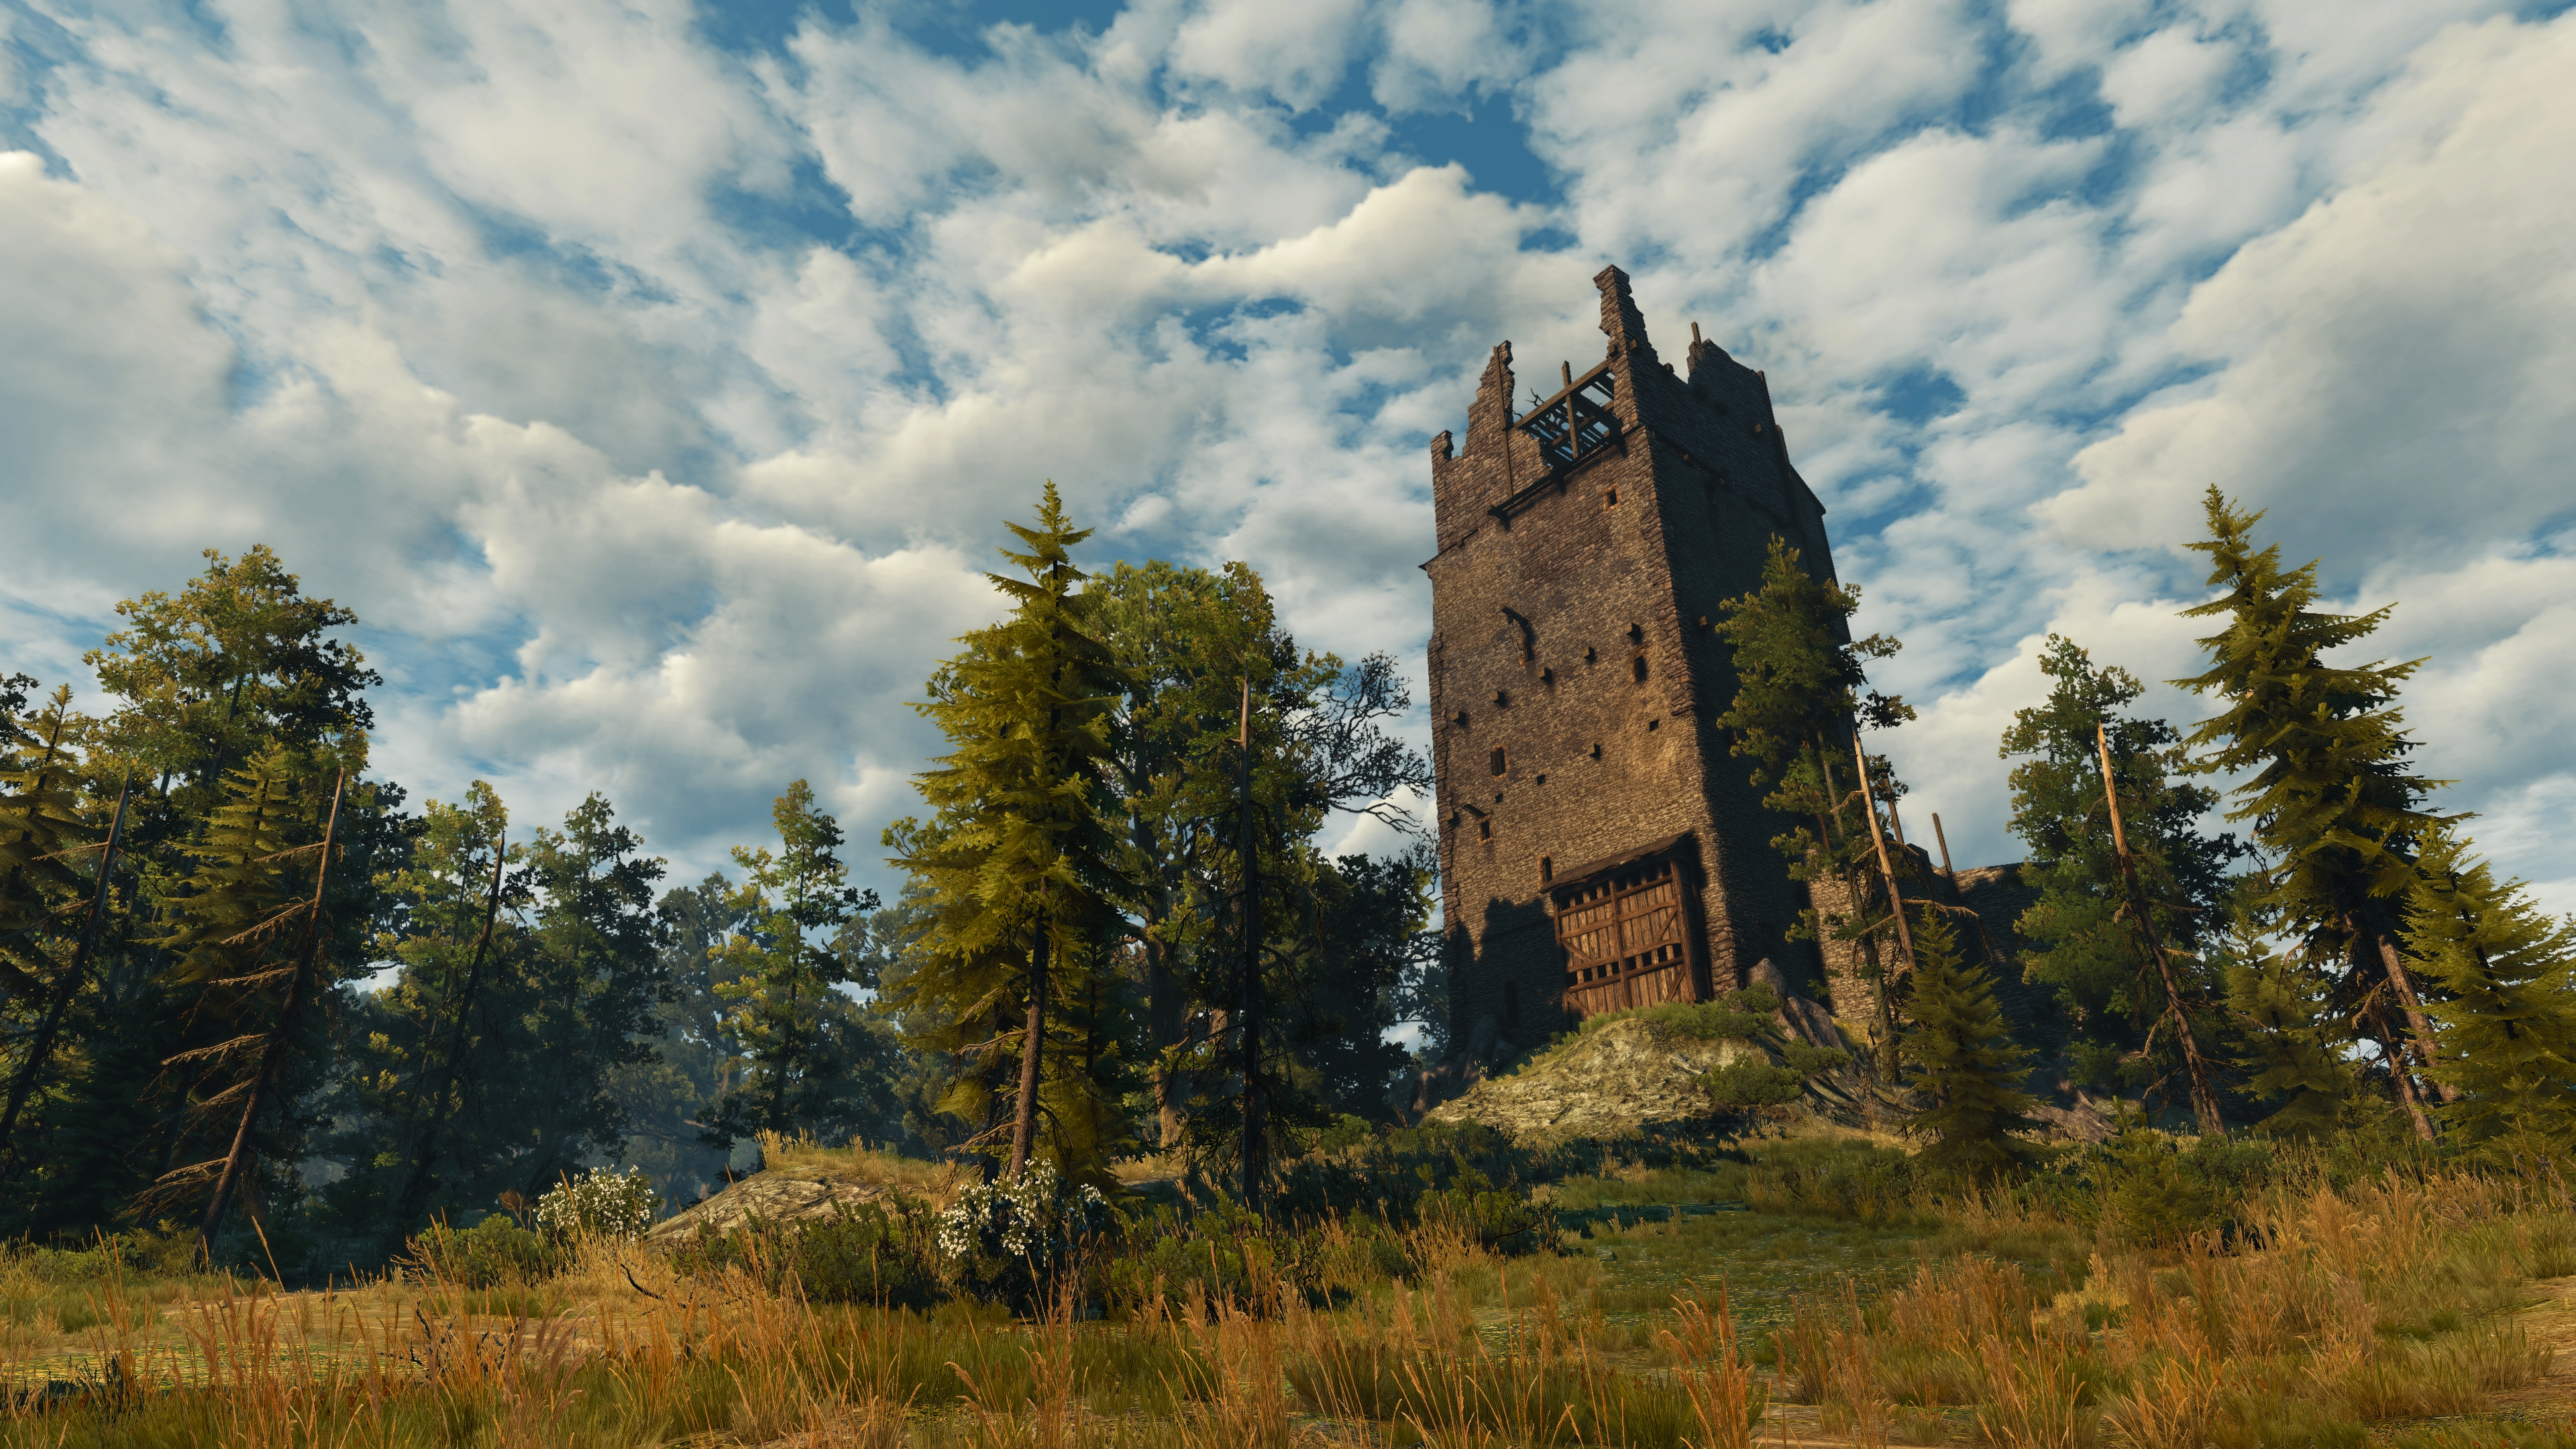 General 3840x2160 The Witcher 3: Wild Hunt screen shot PC gaming